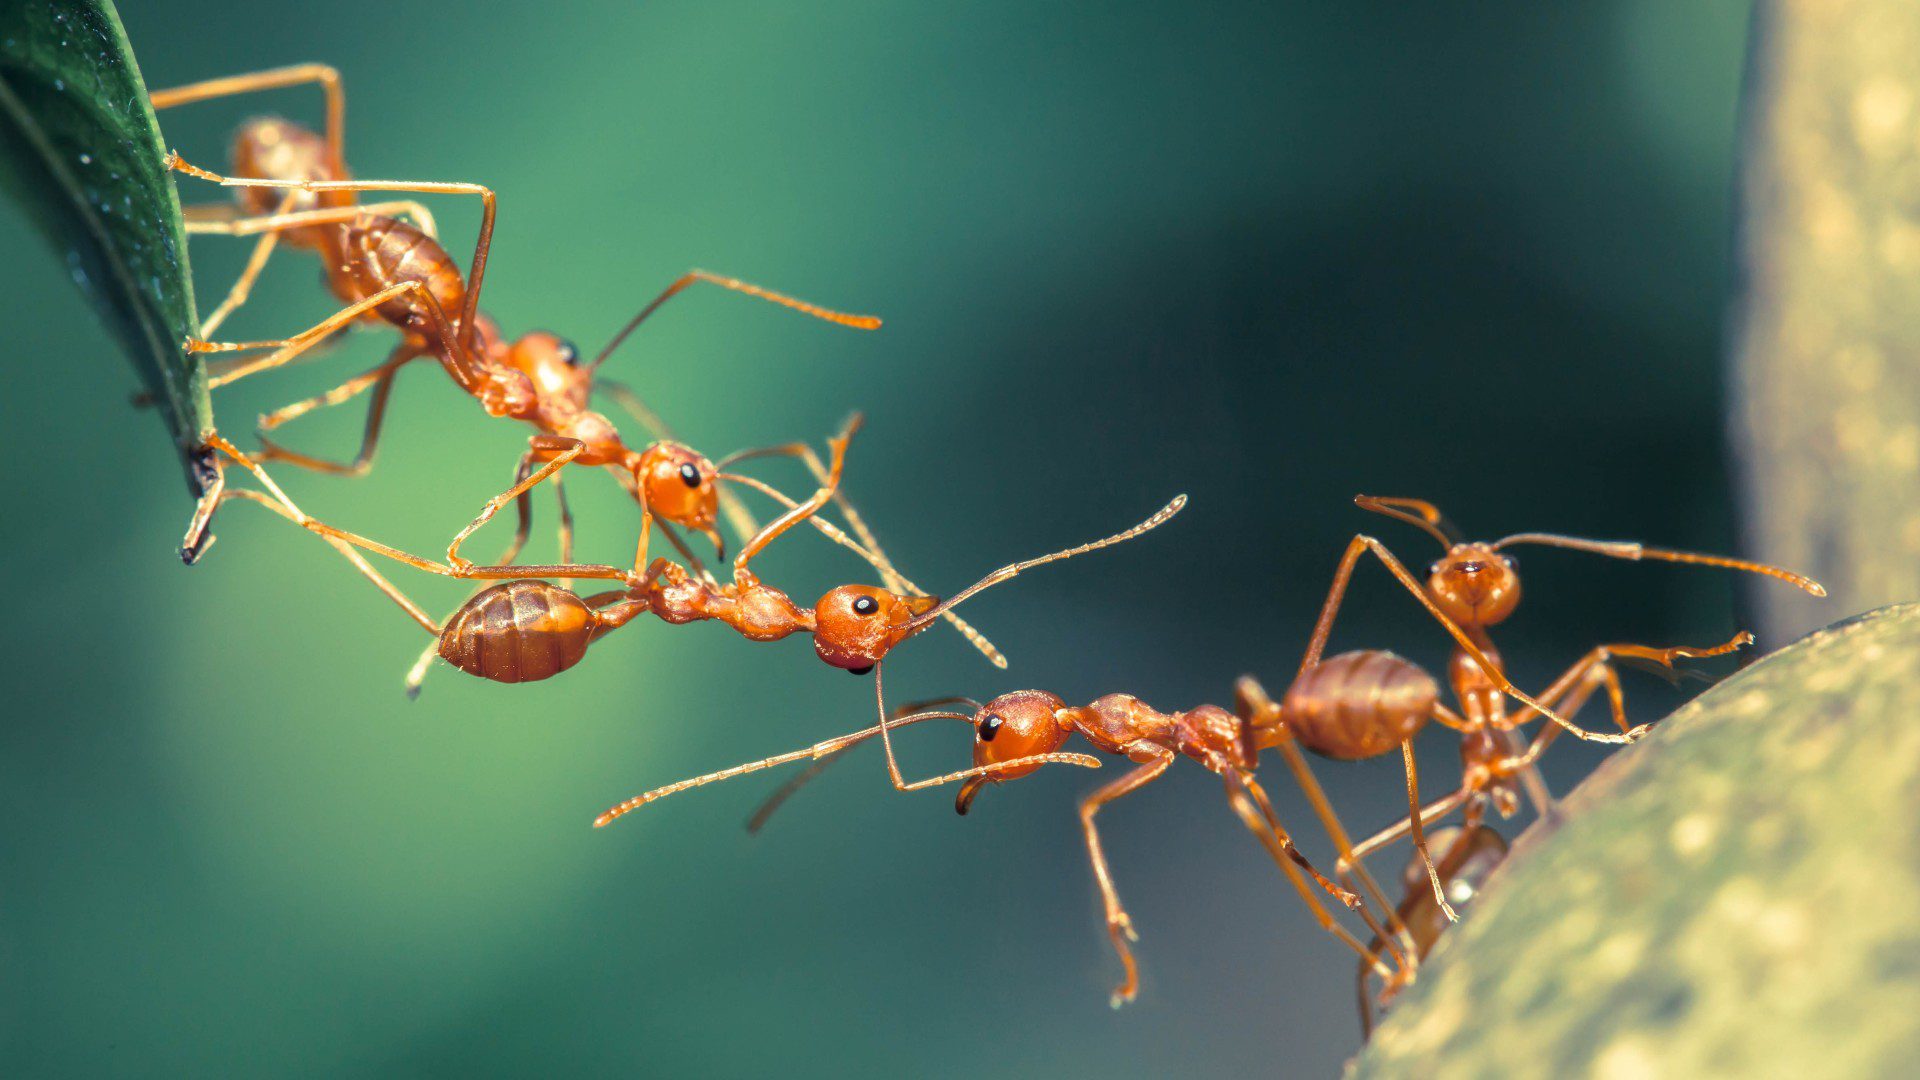 Comparisons were made with the brains of ants.